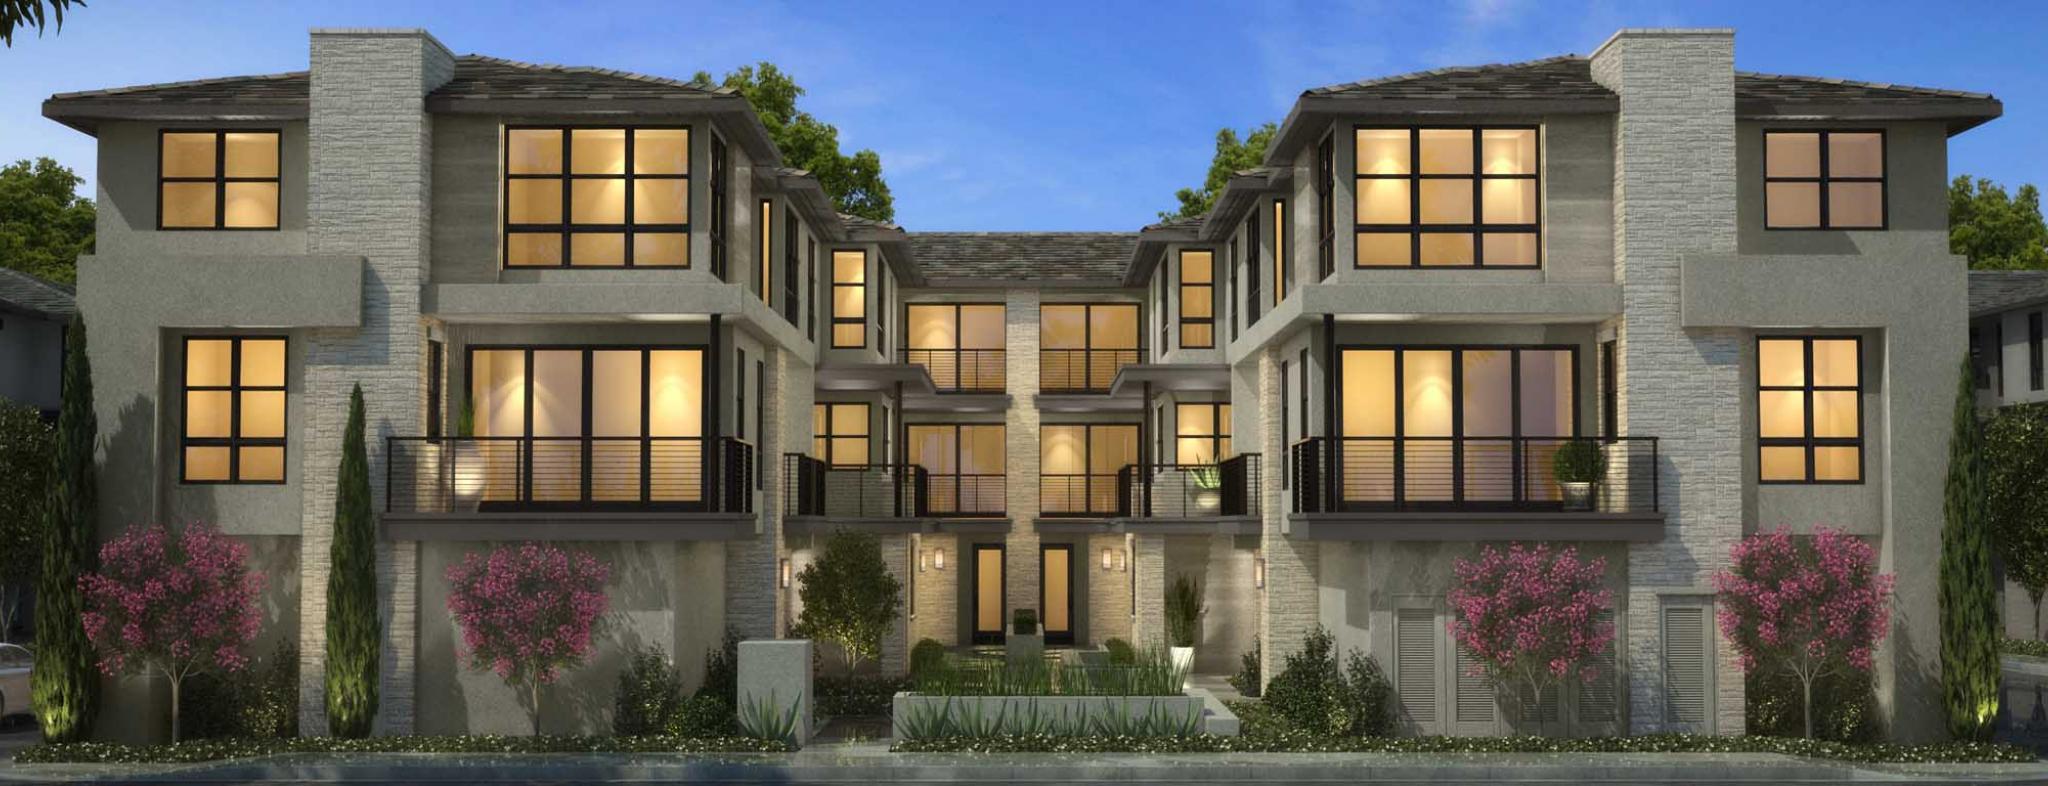 The New Home Company Announces Model Home Grand Opening for First Community in San Diego